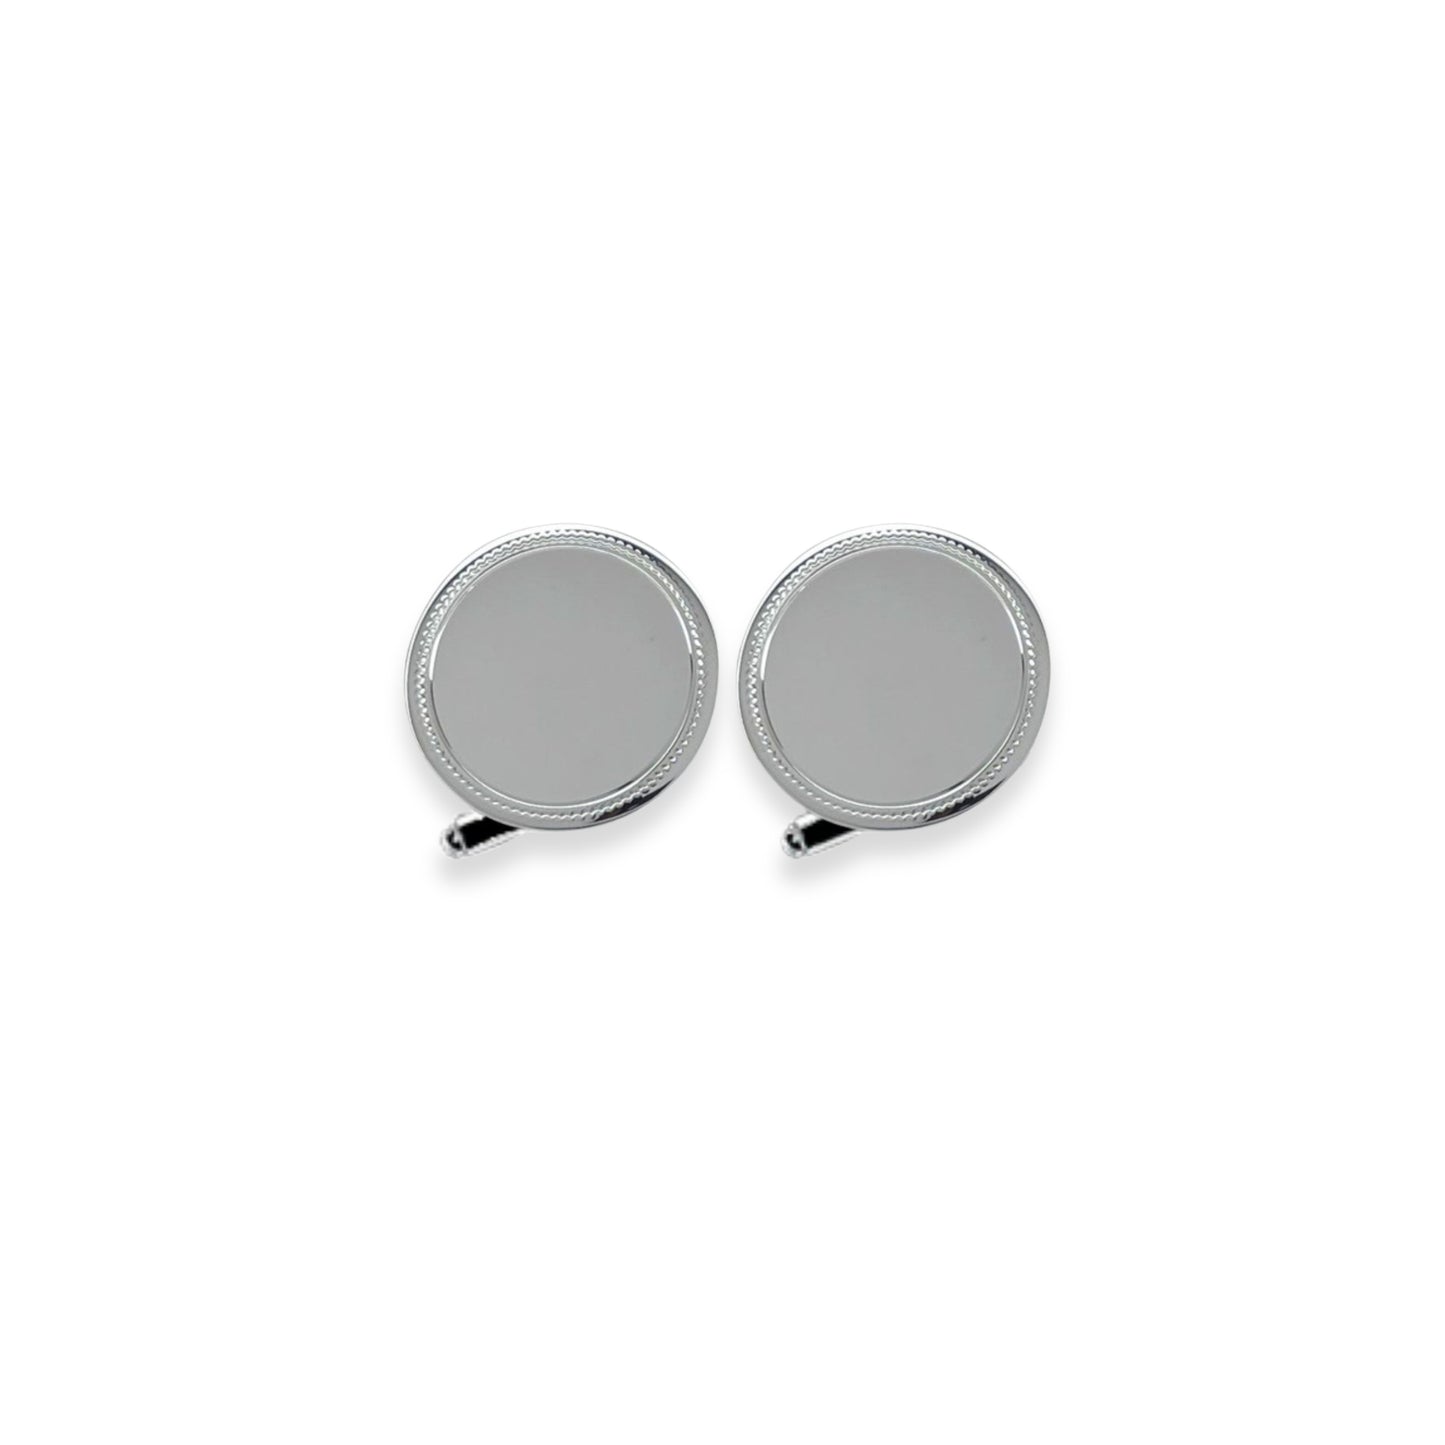 Sterling Silver Round Cufflinks with Wriggled Engine Turned Design